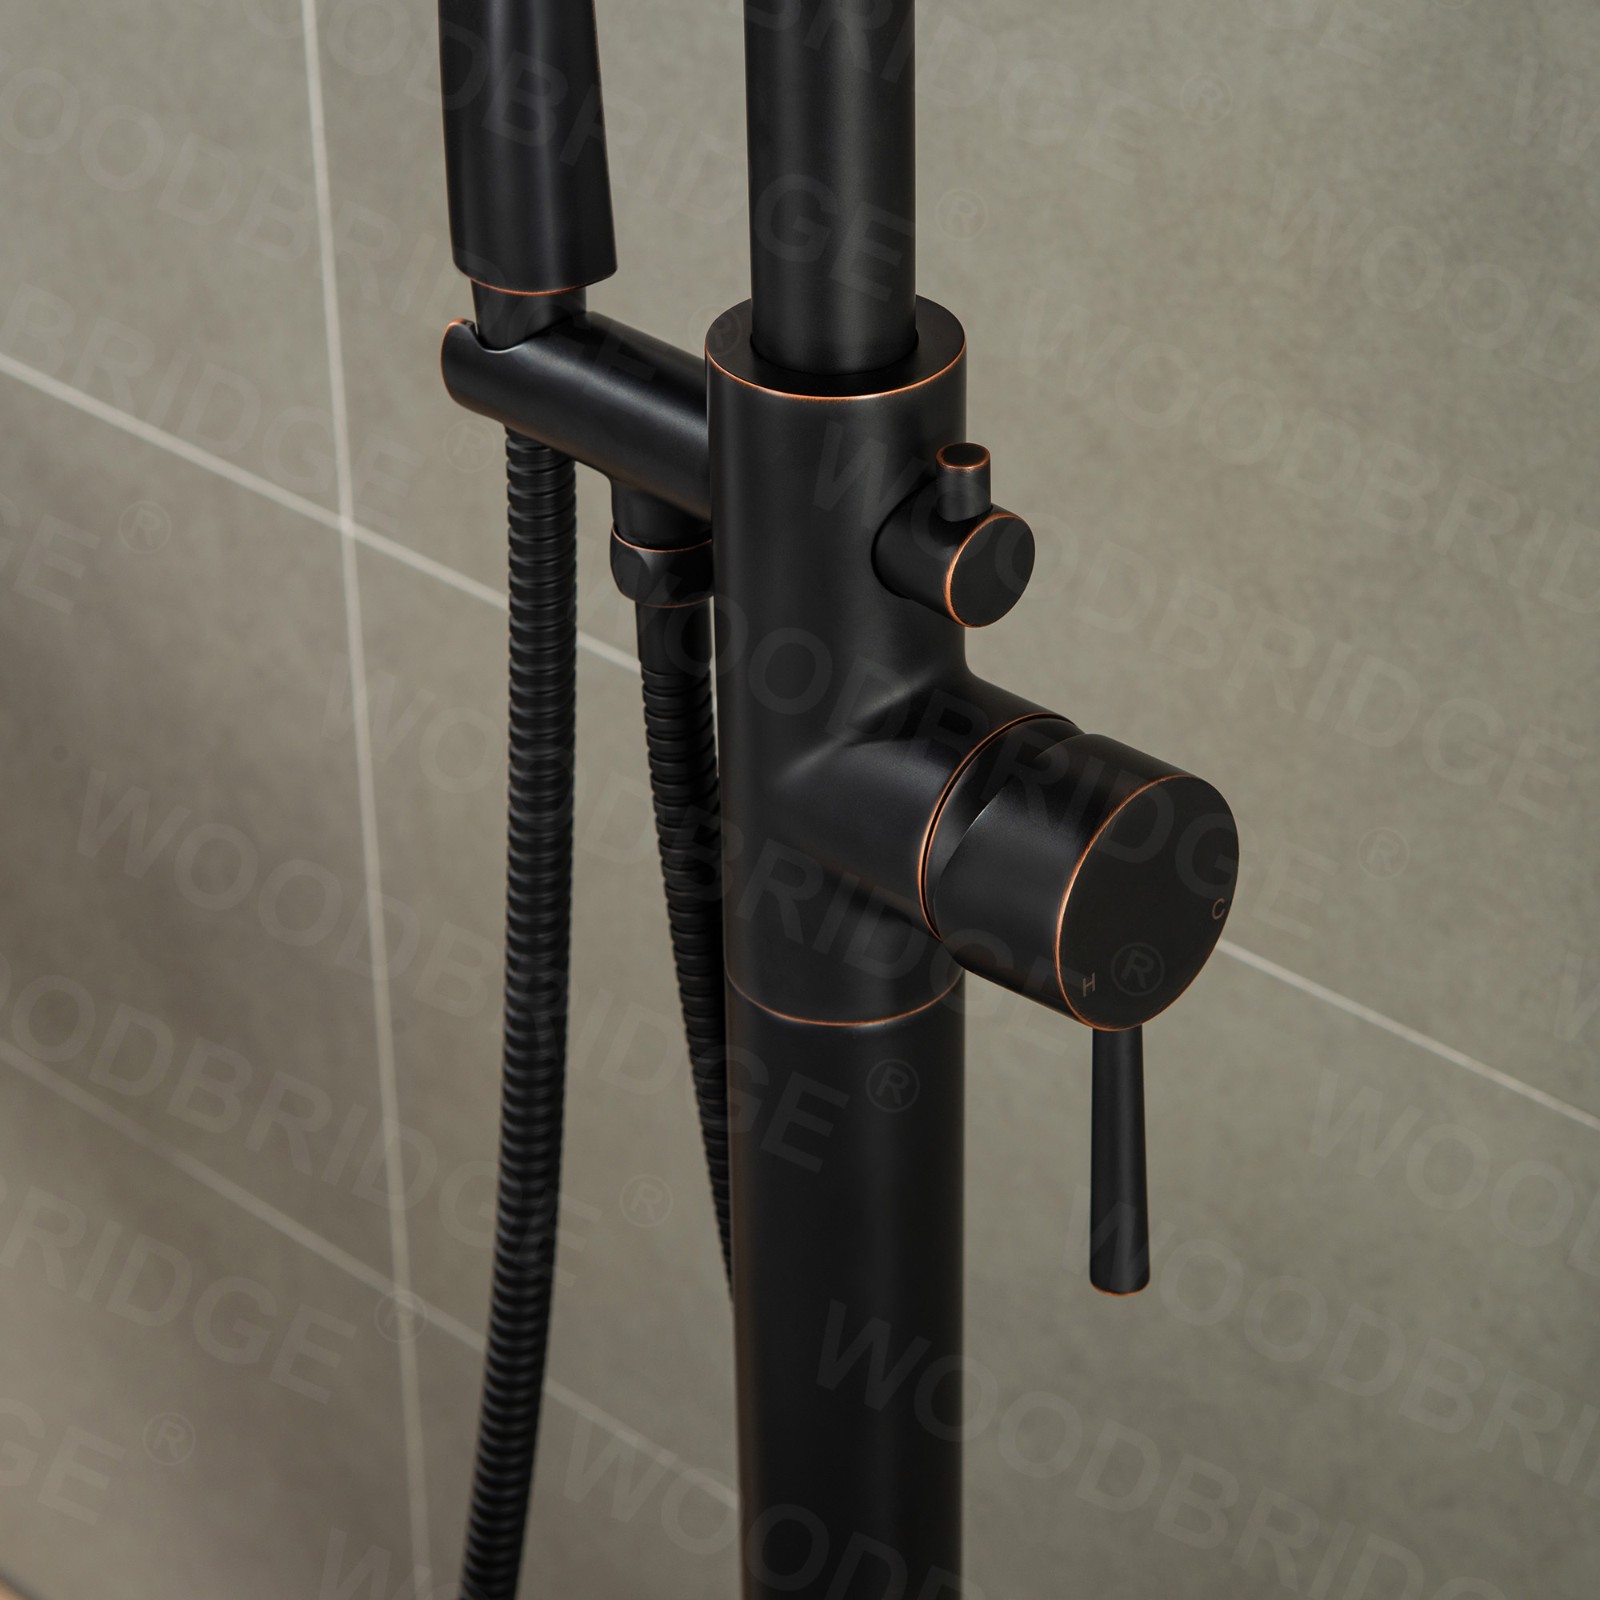  WOODBRIDGE Contemporary Single Handle Floor Mount Freestanding Tub Filler Faucet with Hand Shower in (Oil Rubbed Bronze) Finish,F0010ORBSQ_6036